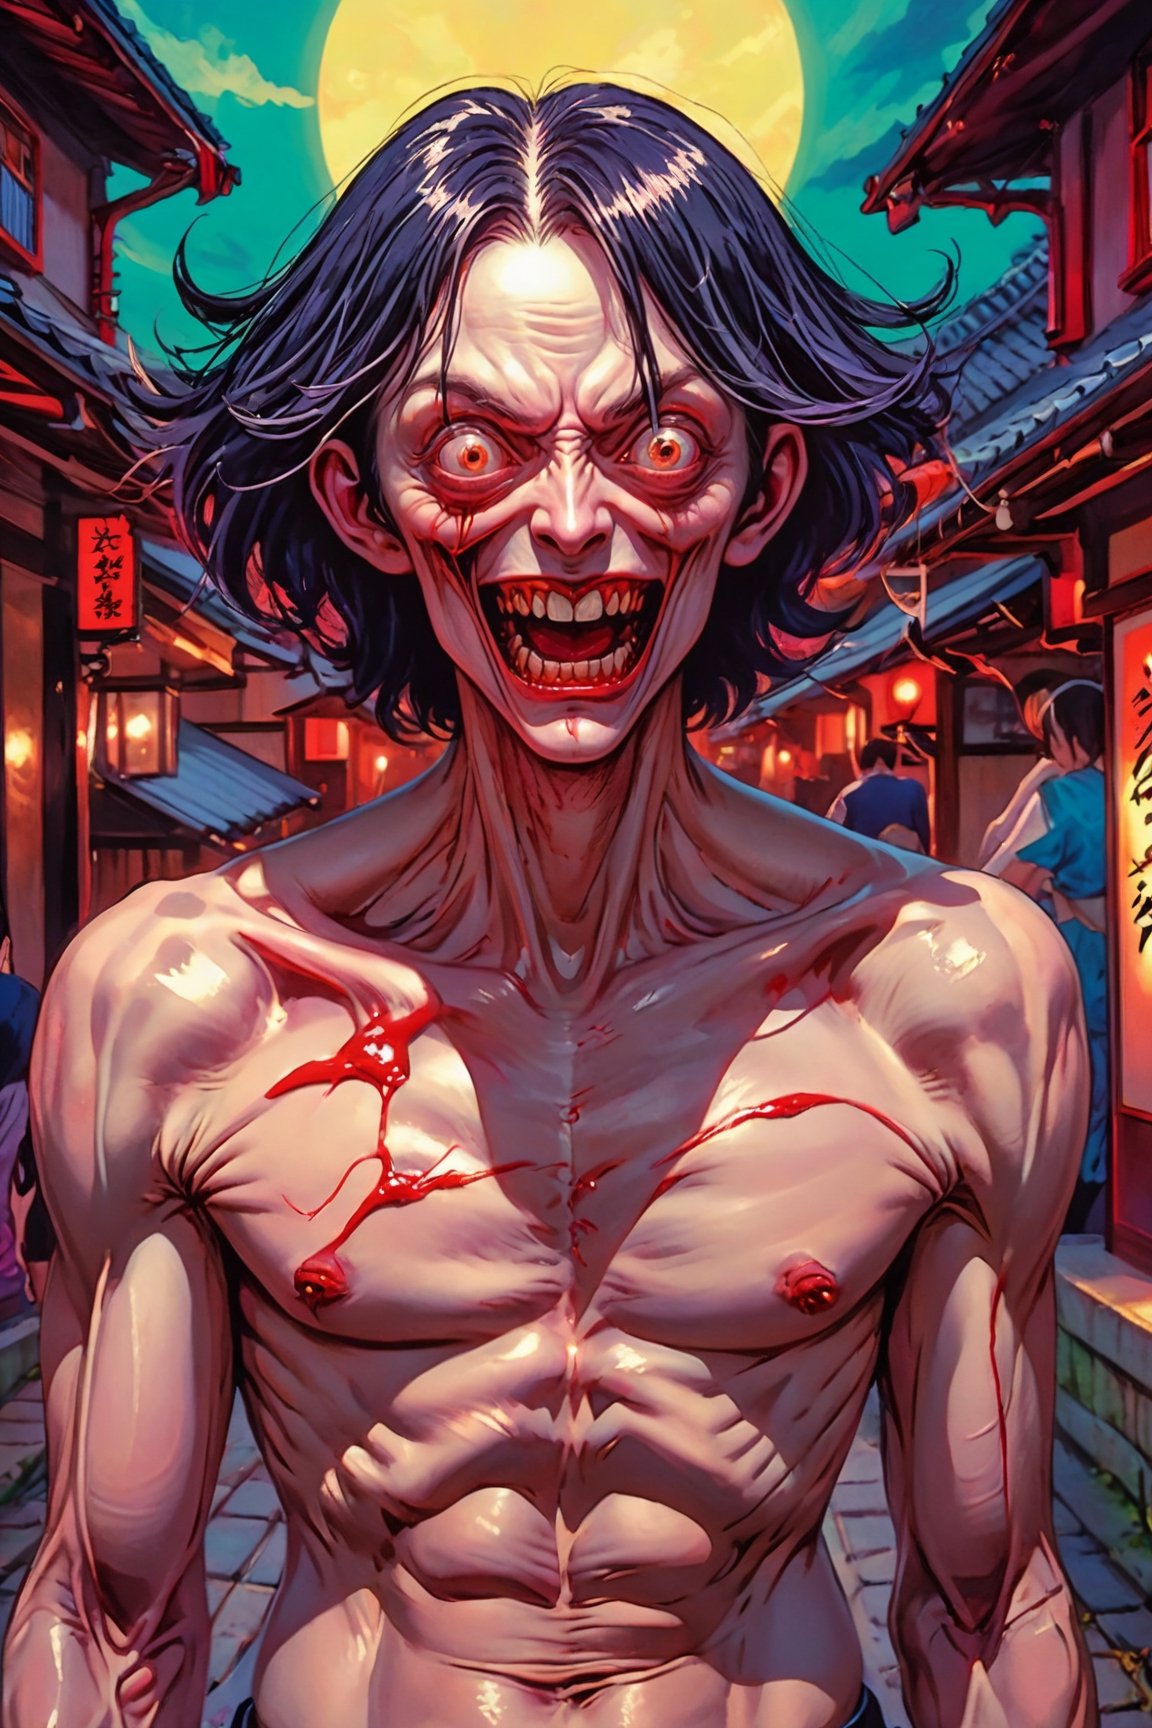 evil vampire, in the style of horror manga, Junji Ito, unique yokai illustrations, stylized violence, psychological, paranoid sensitivity, , distorted bodies, hyperbolic expression, pulp comics, chrome-plated. Resolution: 4k.,sooyaaa,aw0k euphoric style,rosy,jinx (league of legends),buffys,HellAI